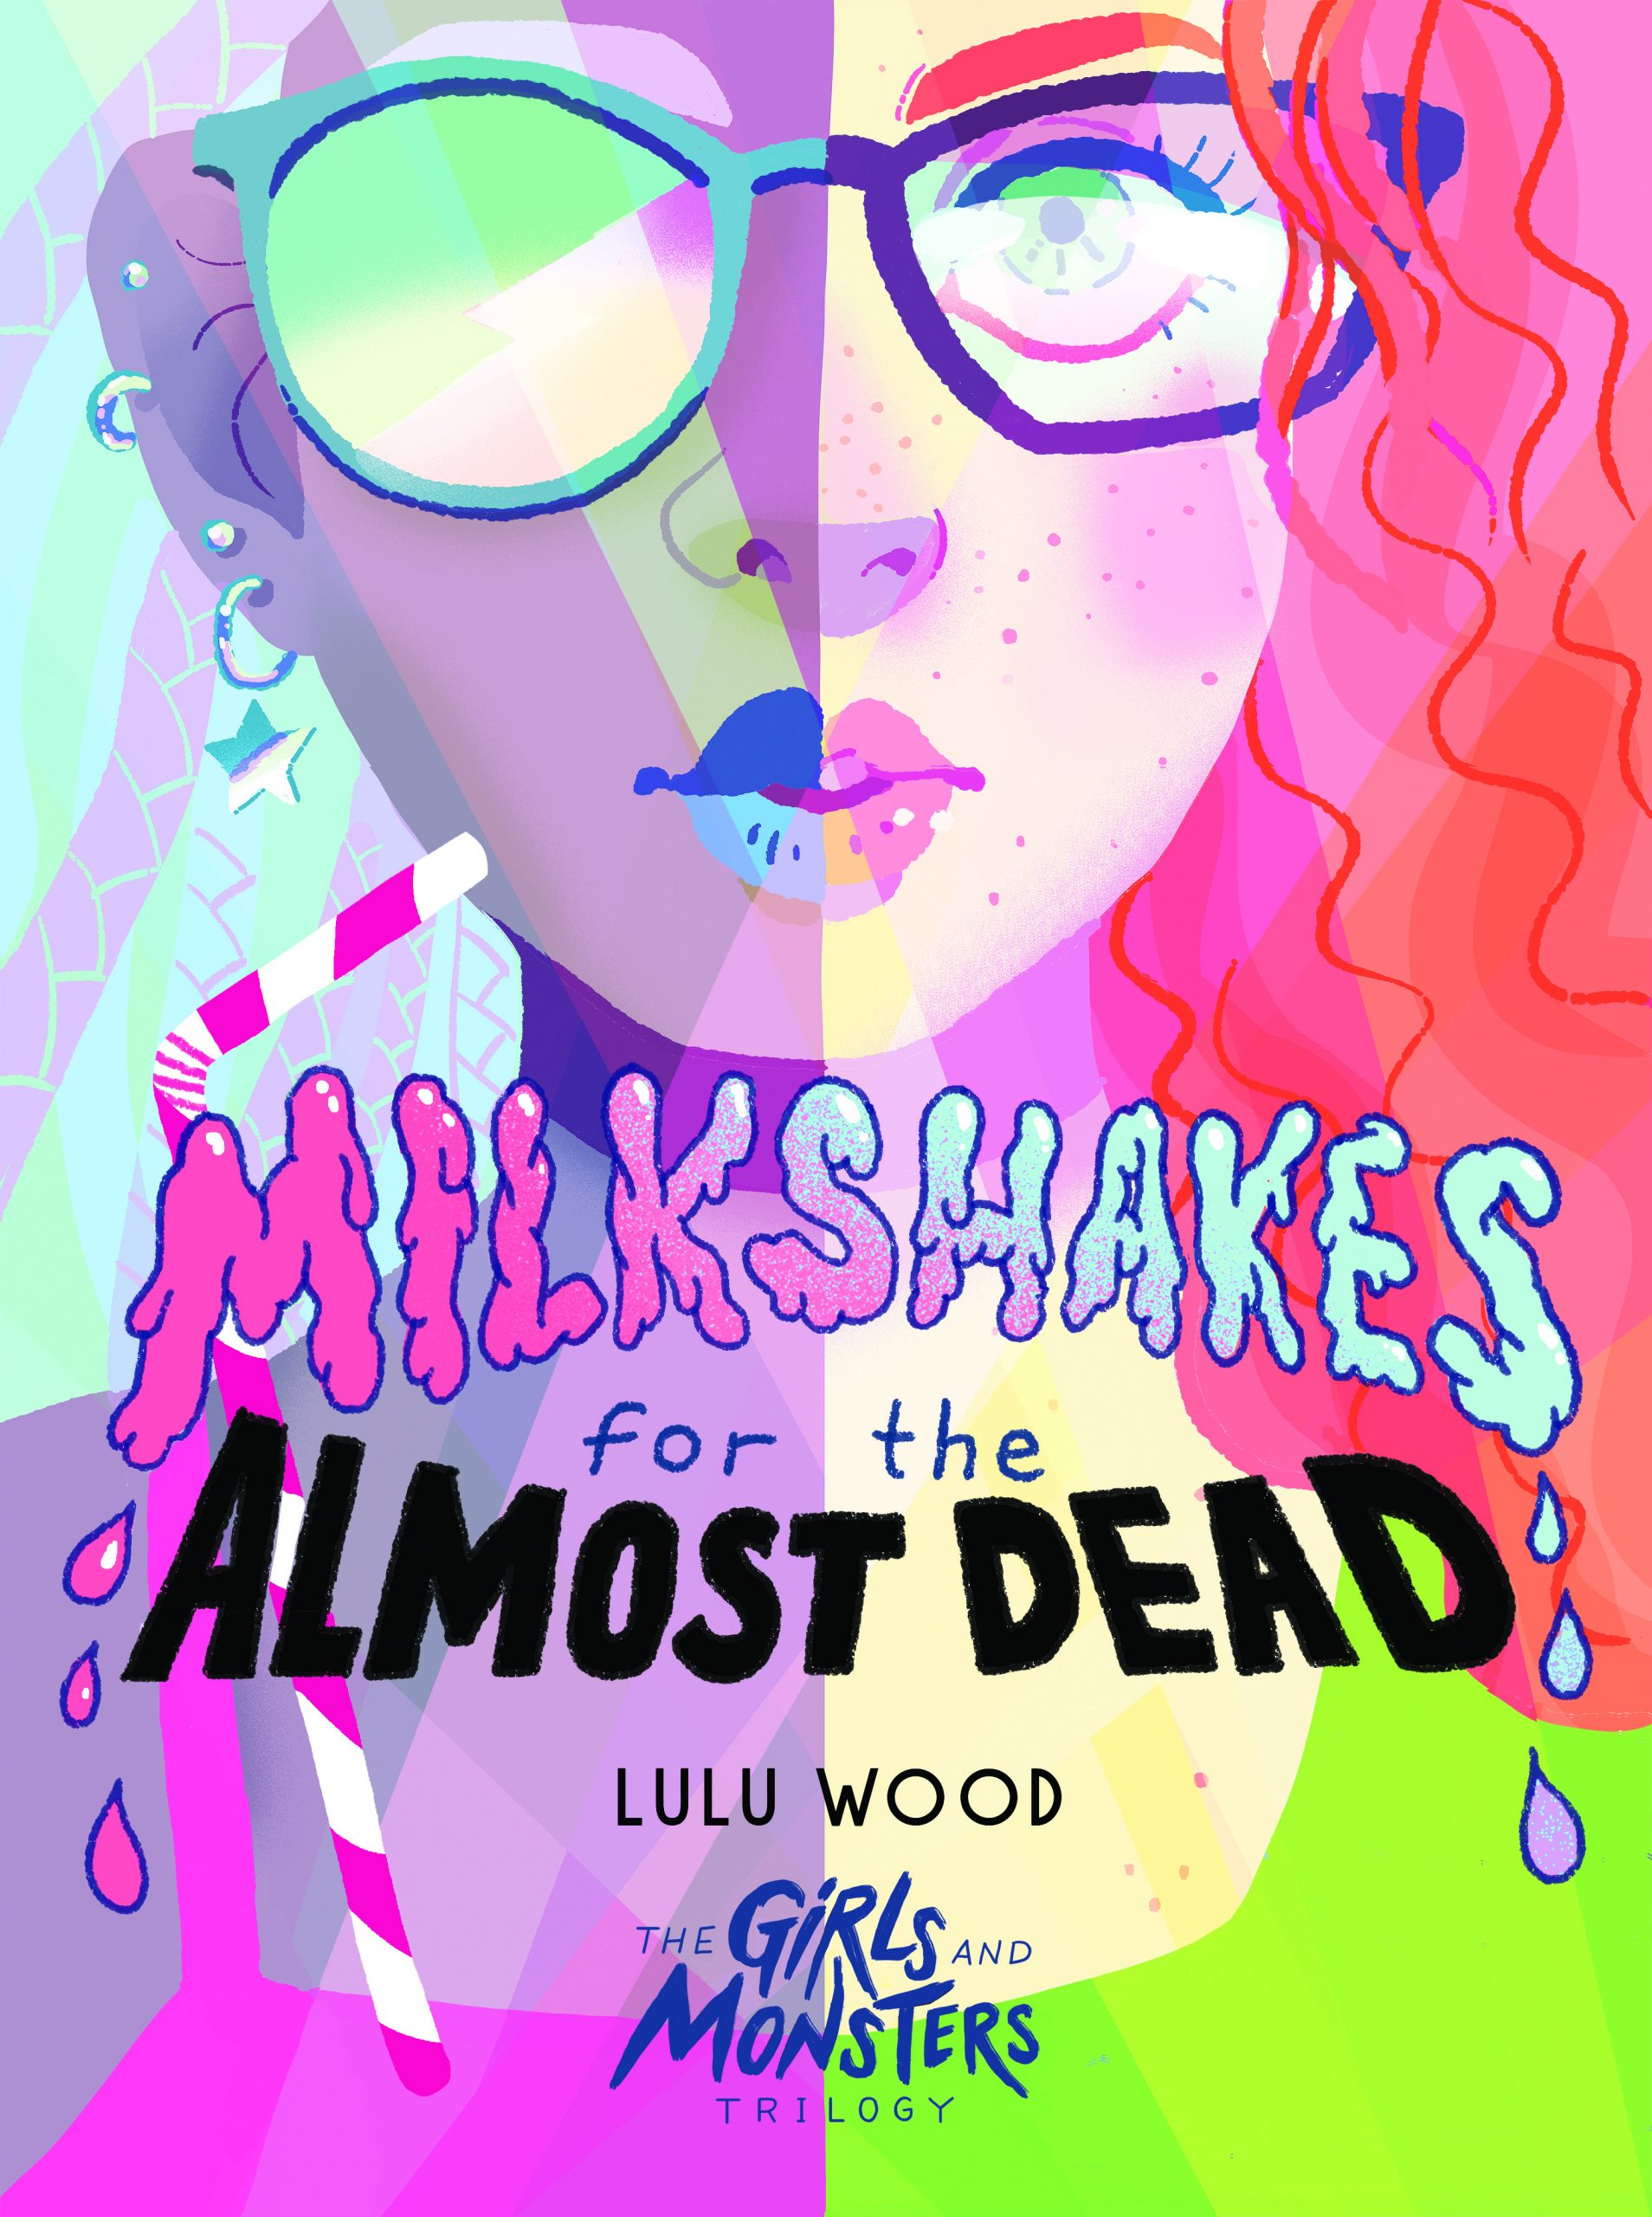 AUTHER LULU WOOD TALKS TO MUMFORCE ABOUT HER NEW BOOK, MILKSHAKES FOR THE ALMOST DEAD